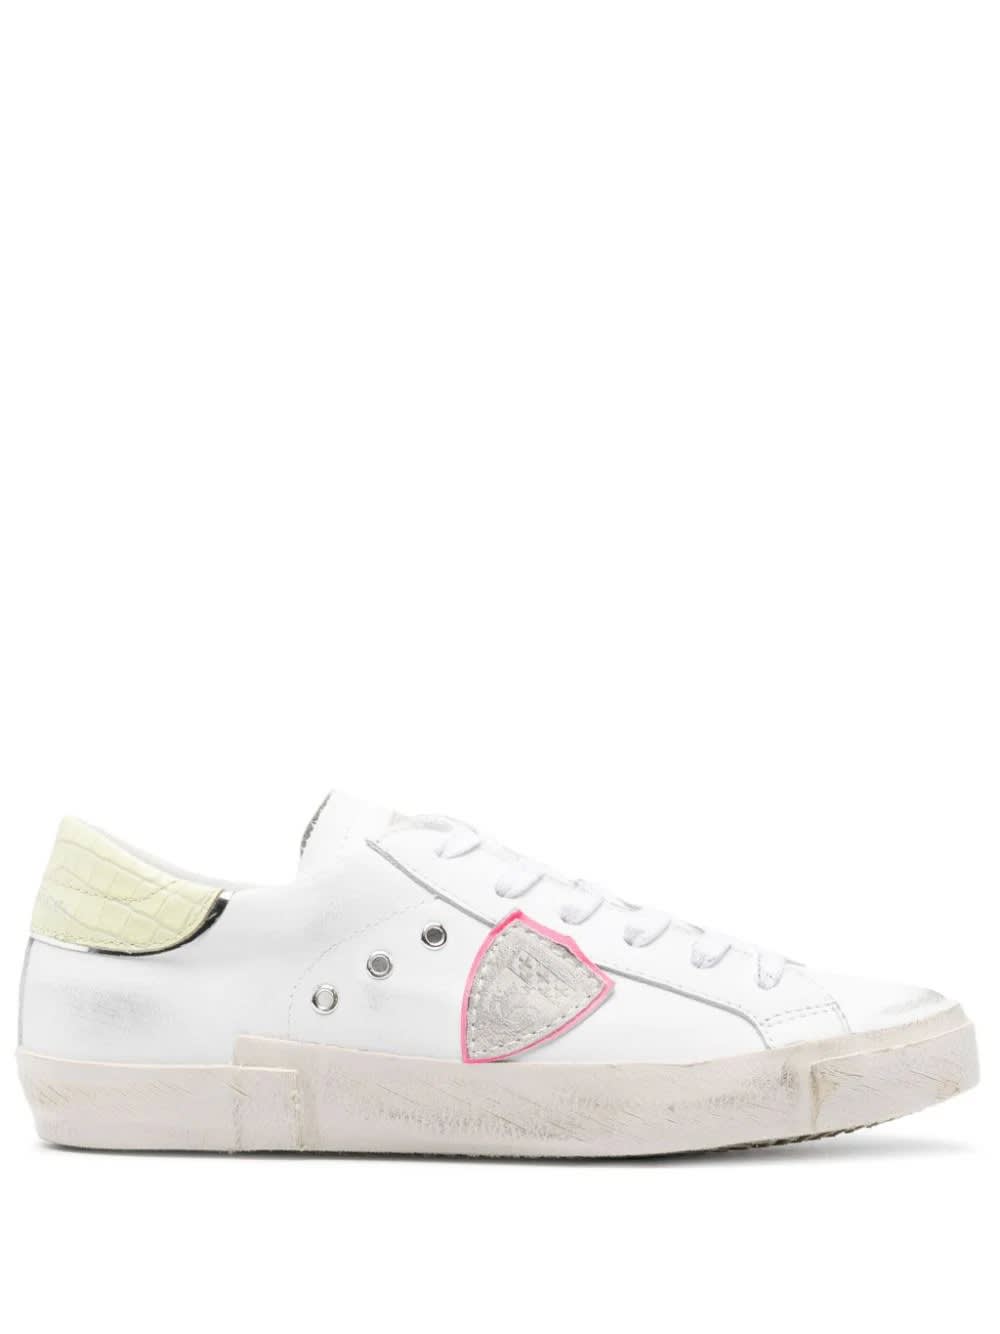 Philippe Model Prsx Low Sneakers - White And Yellow